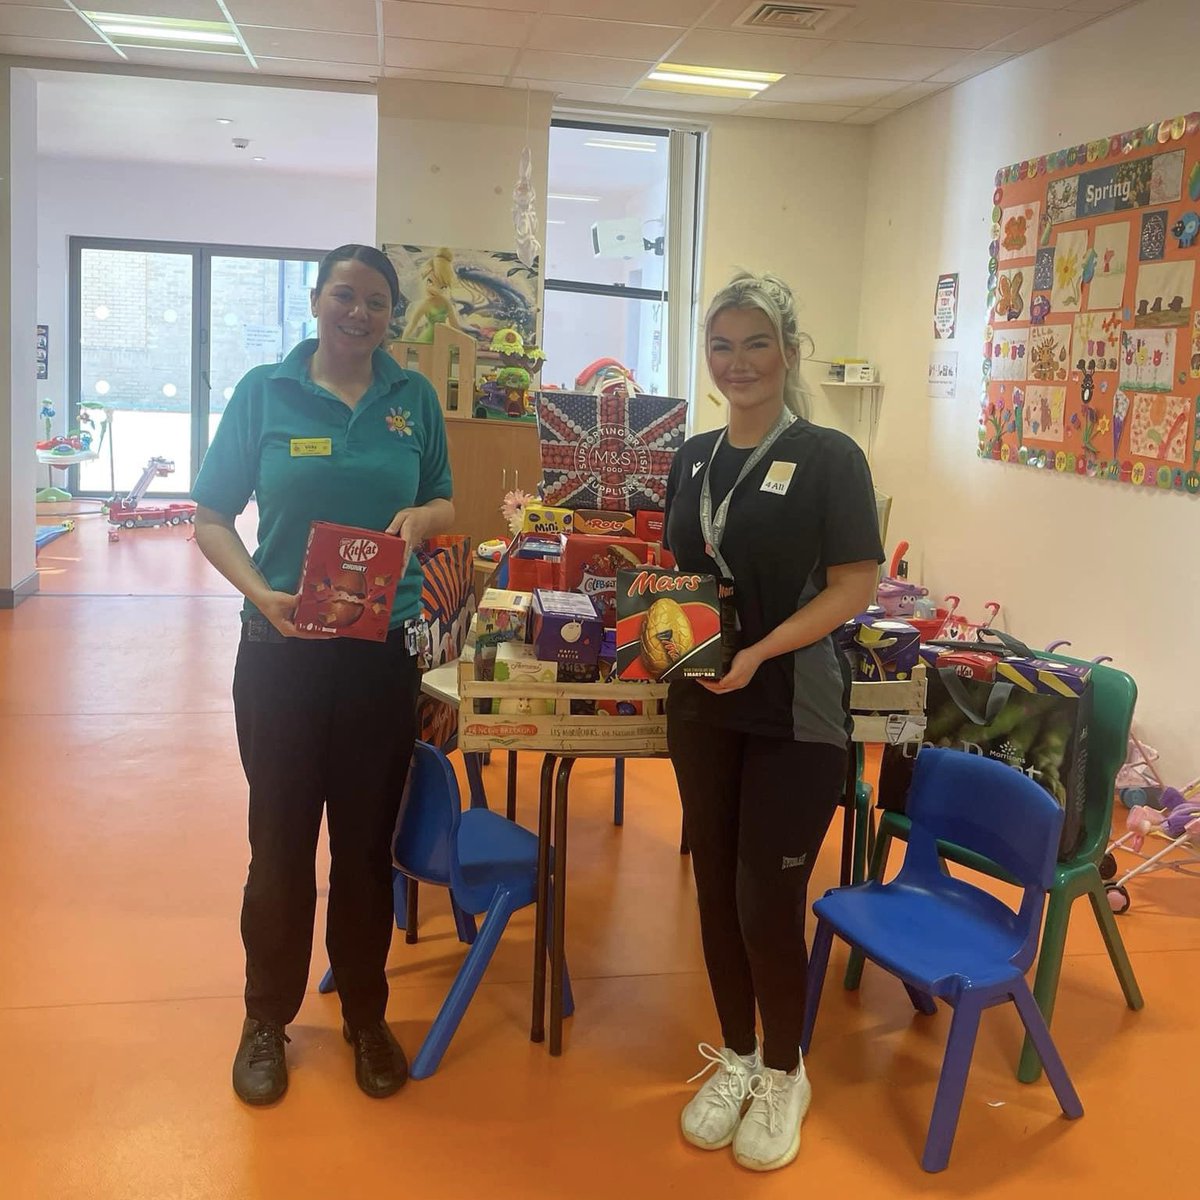 🐰 Our Community Engagement Officer, Tay Whelan, visited the Children's Ward at Princess Royal Hospital to donate 100 eggs gifted by St John's Ambulance Badgers. We deeply value the dedication of the NHS and wanted to express our gratitude through this gesture. 

#Shropshire